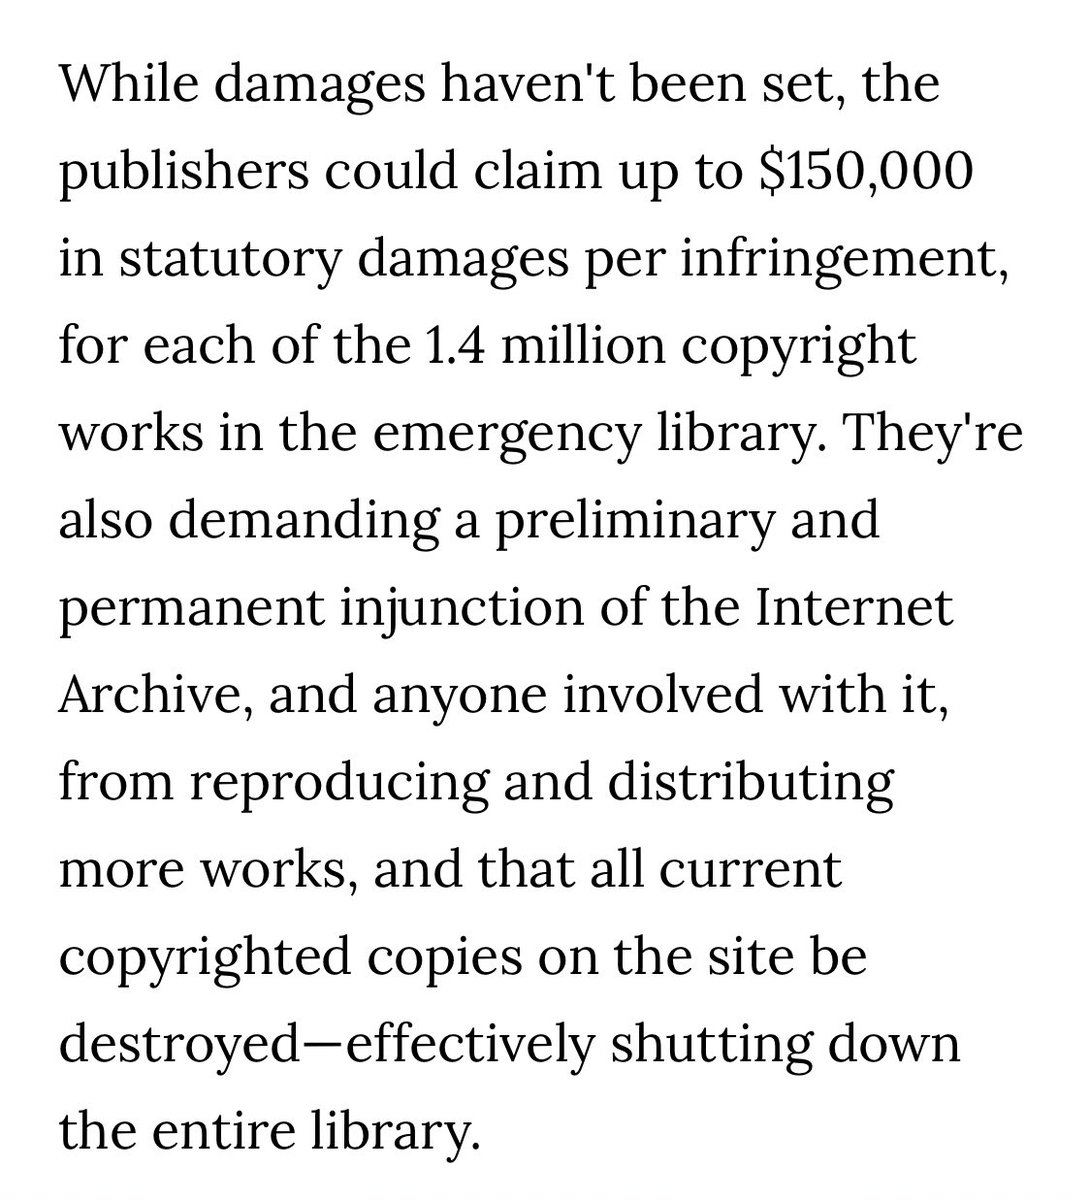 Pretty cool that Chuck Wendig decided to play cop on the Internet Archive, so not only did they end their TEMPORARY unlimited lending program (the tweet you see going around) but the lawsuit his shit caused has put the ENTIRE archive in jeopardy.  https://www.vice.com/en_us/article/5dzg8n/archiving-the-internet-archive-sued-by-publishers